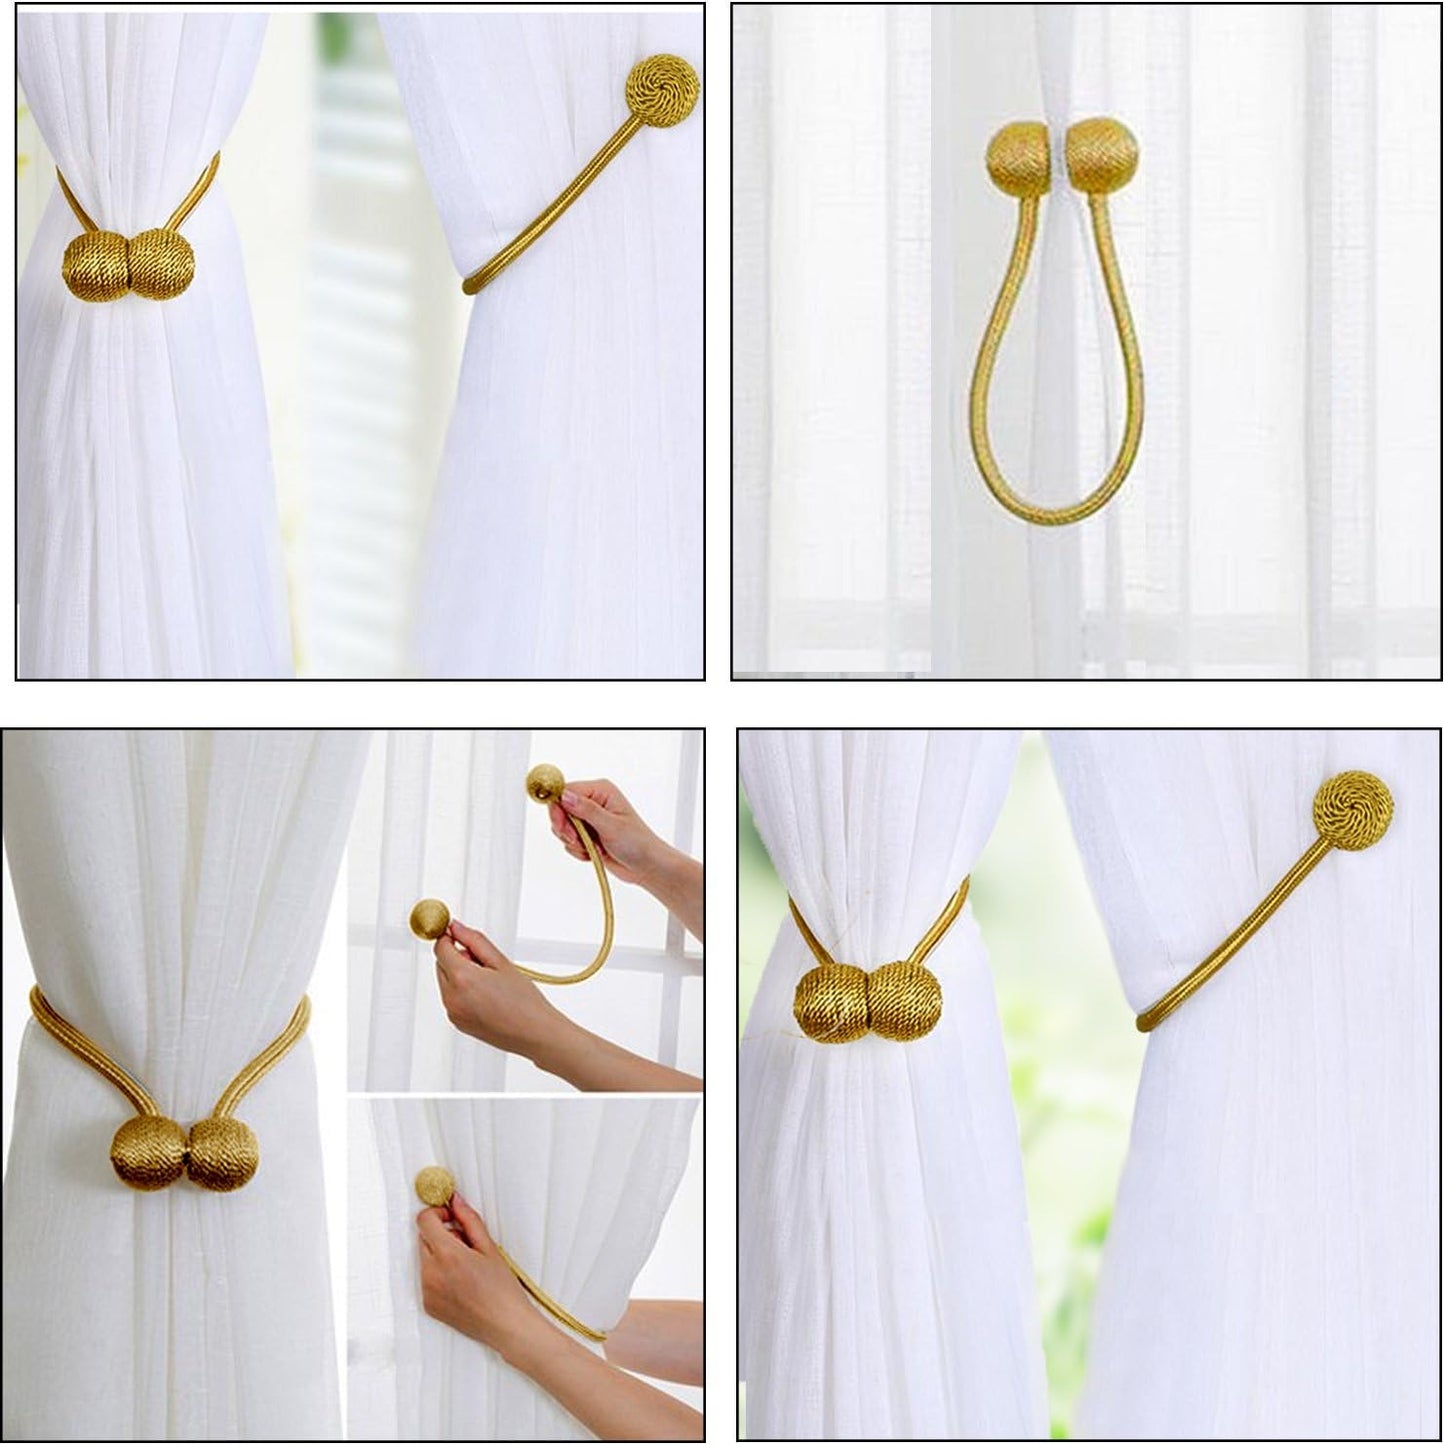 2 Pieces Magnetic Curtain Tiebacks Curtain Clips Rope Holdbacks Curtain Weaving Holder Buckles for Home Office Decorative (UK Patent 6036254) (Gold)